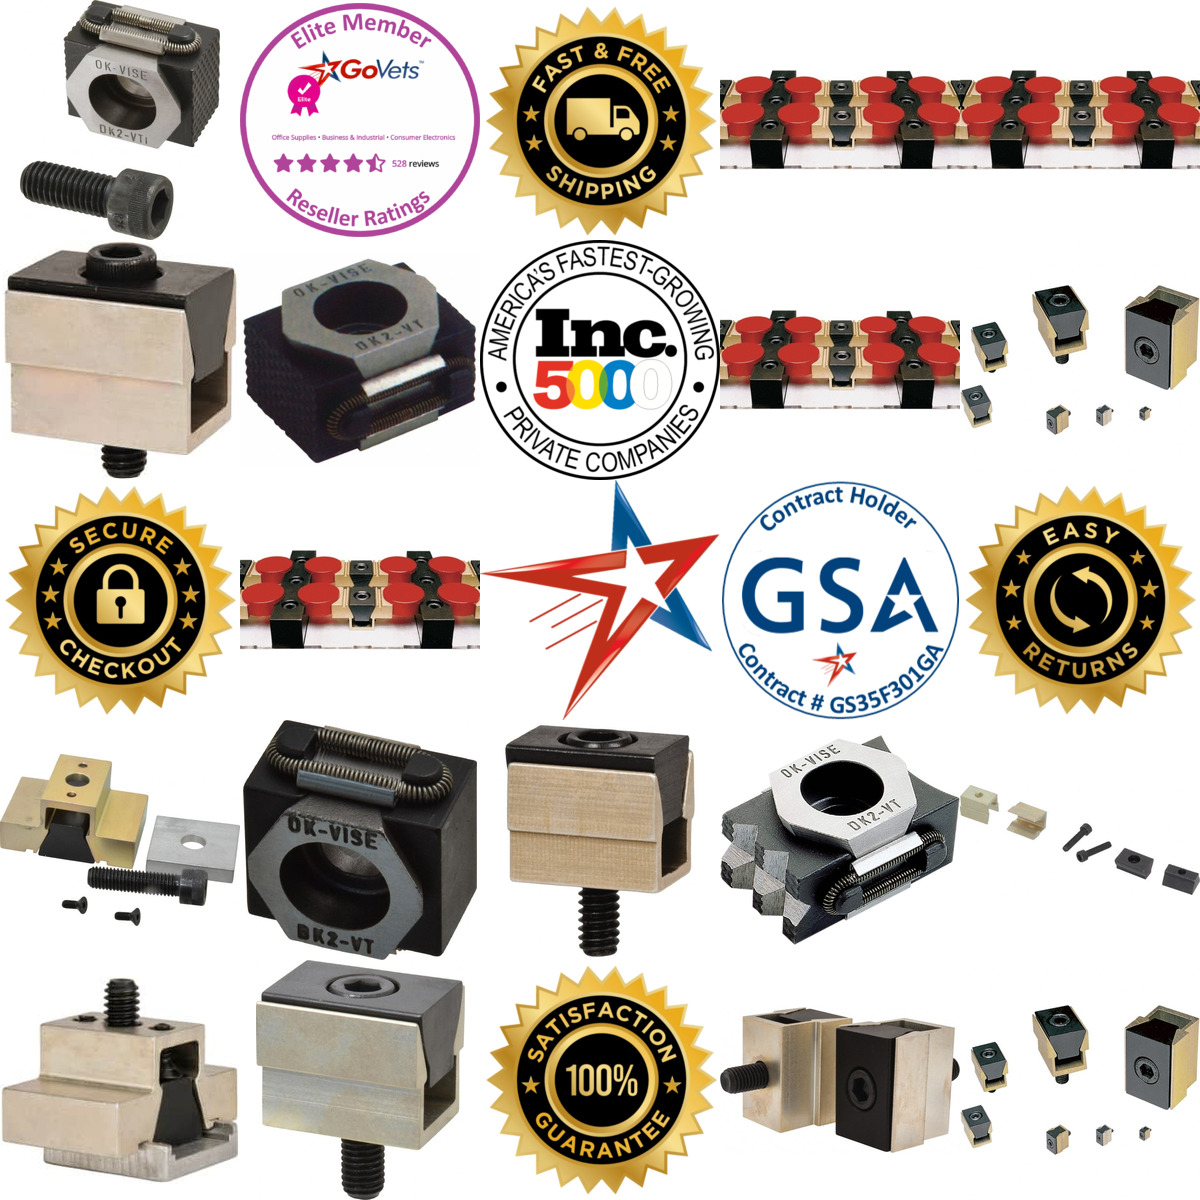 A selection of Wedge Clamps products on GoVets